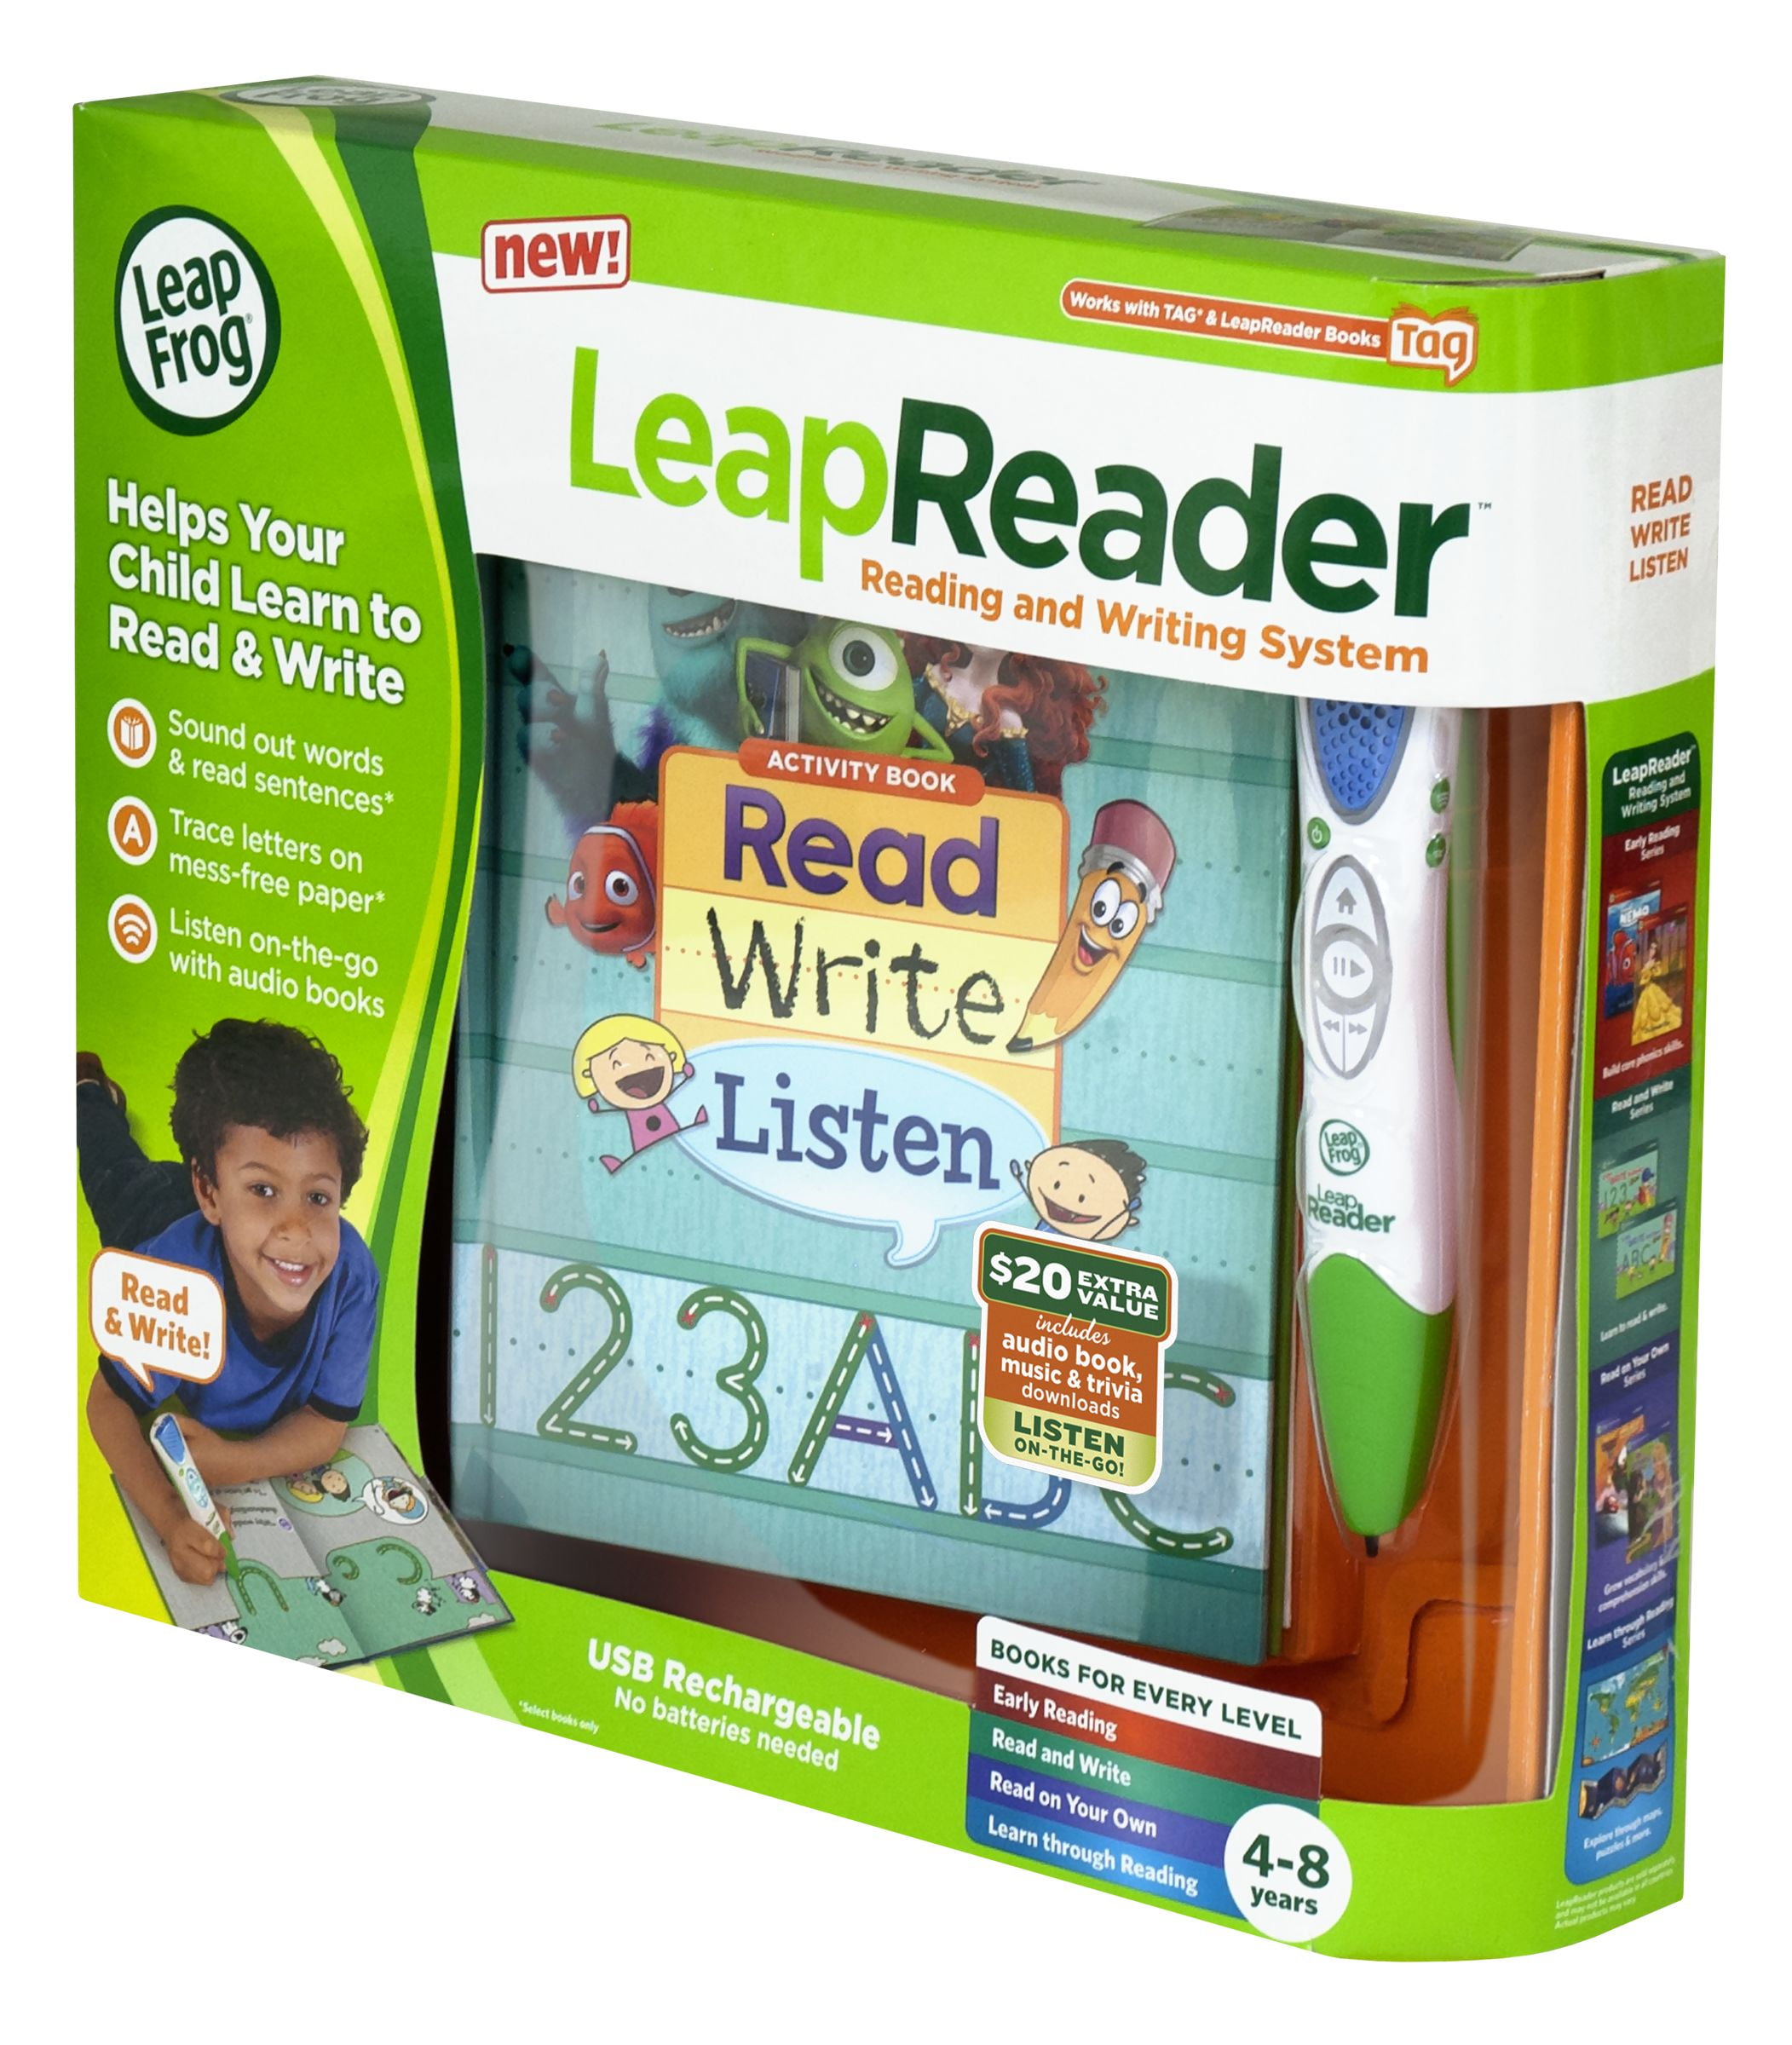 Leap Frog Leap Reader Read & Write Series  Activity Set Ages 4-8.